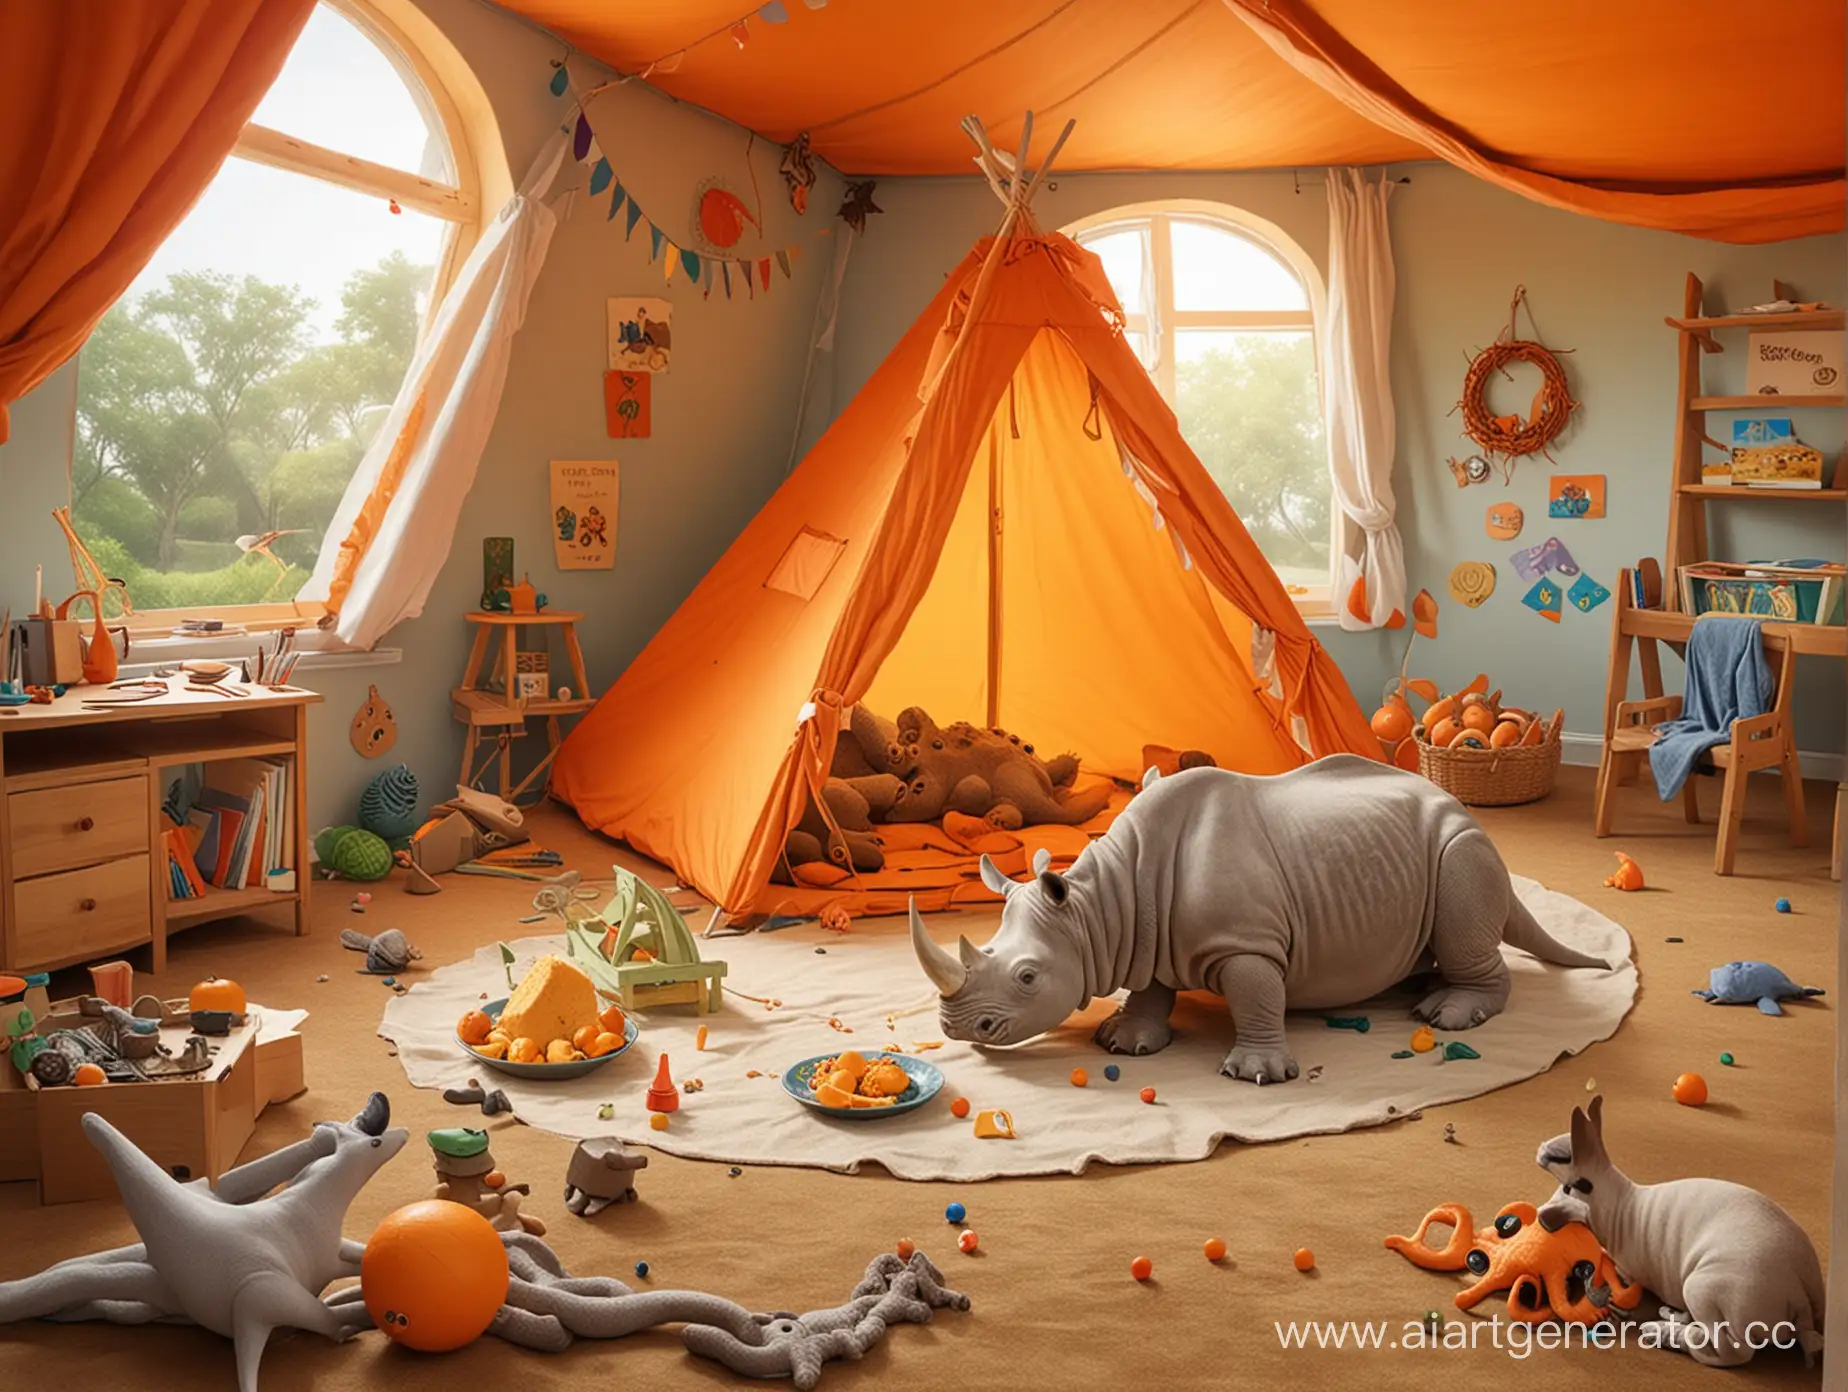 Magical-Room-Lesson-Exploring-Nature-and-Imagination-with-Children